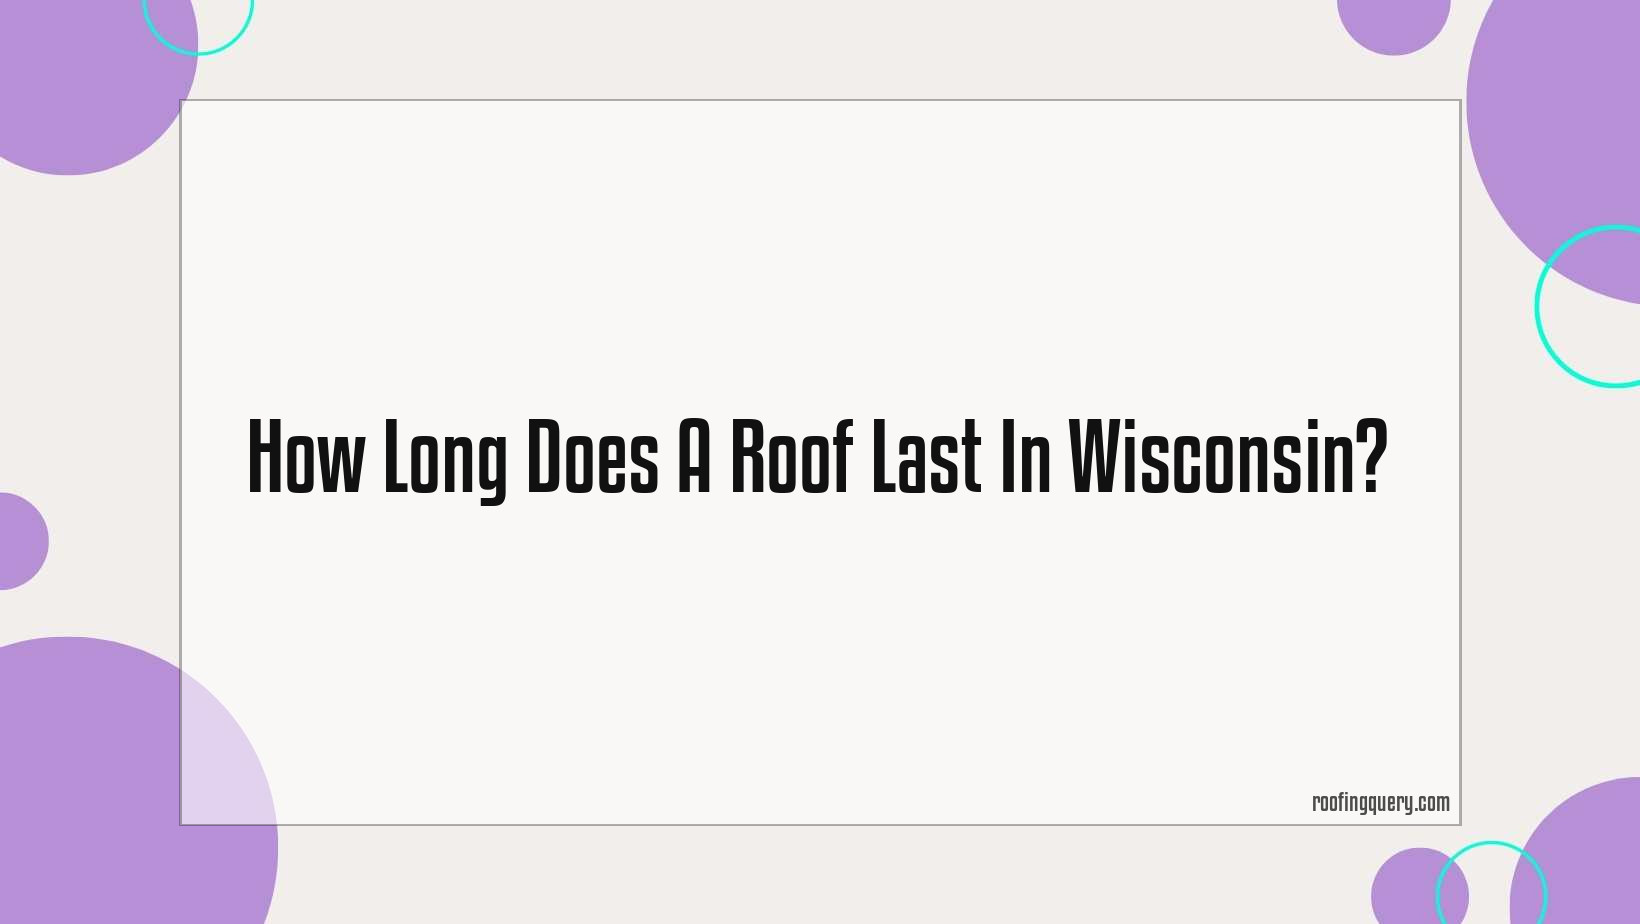 How Long Does A Roof Last In Wisconsin?